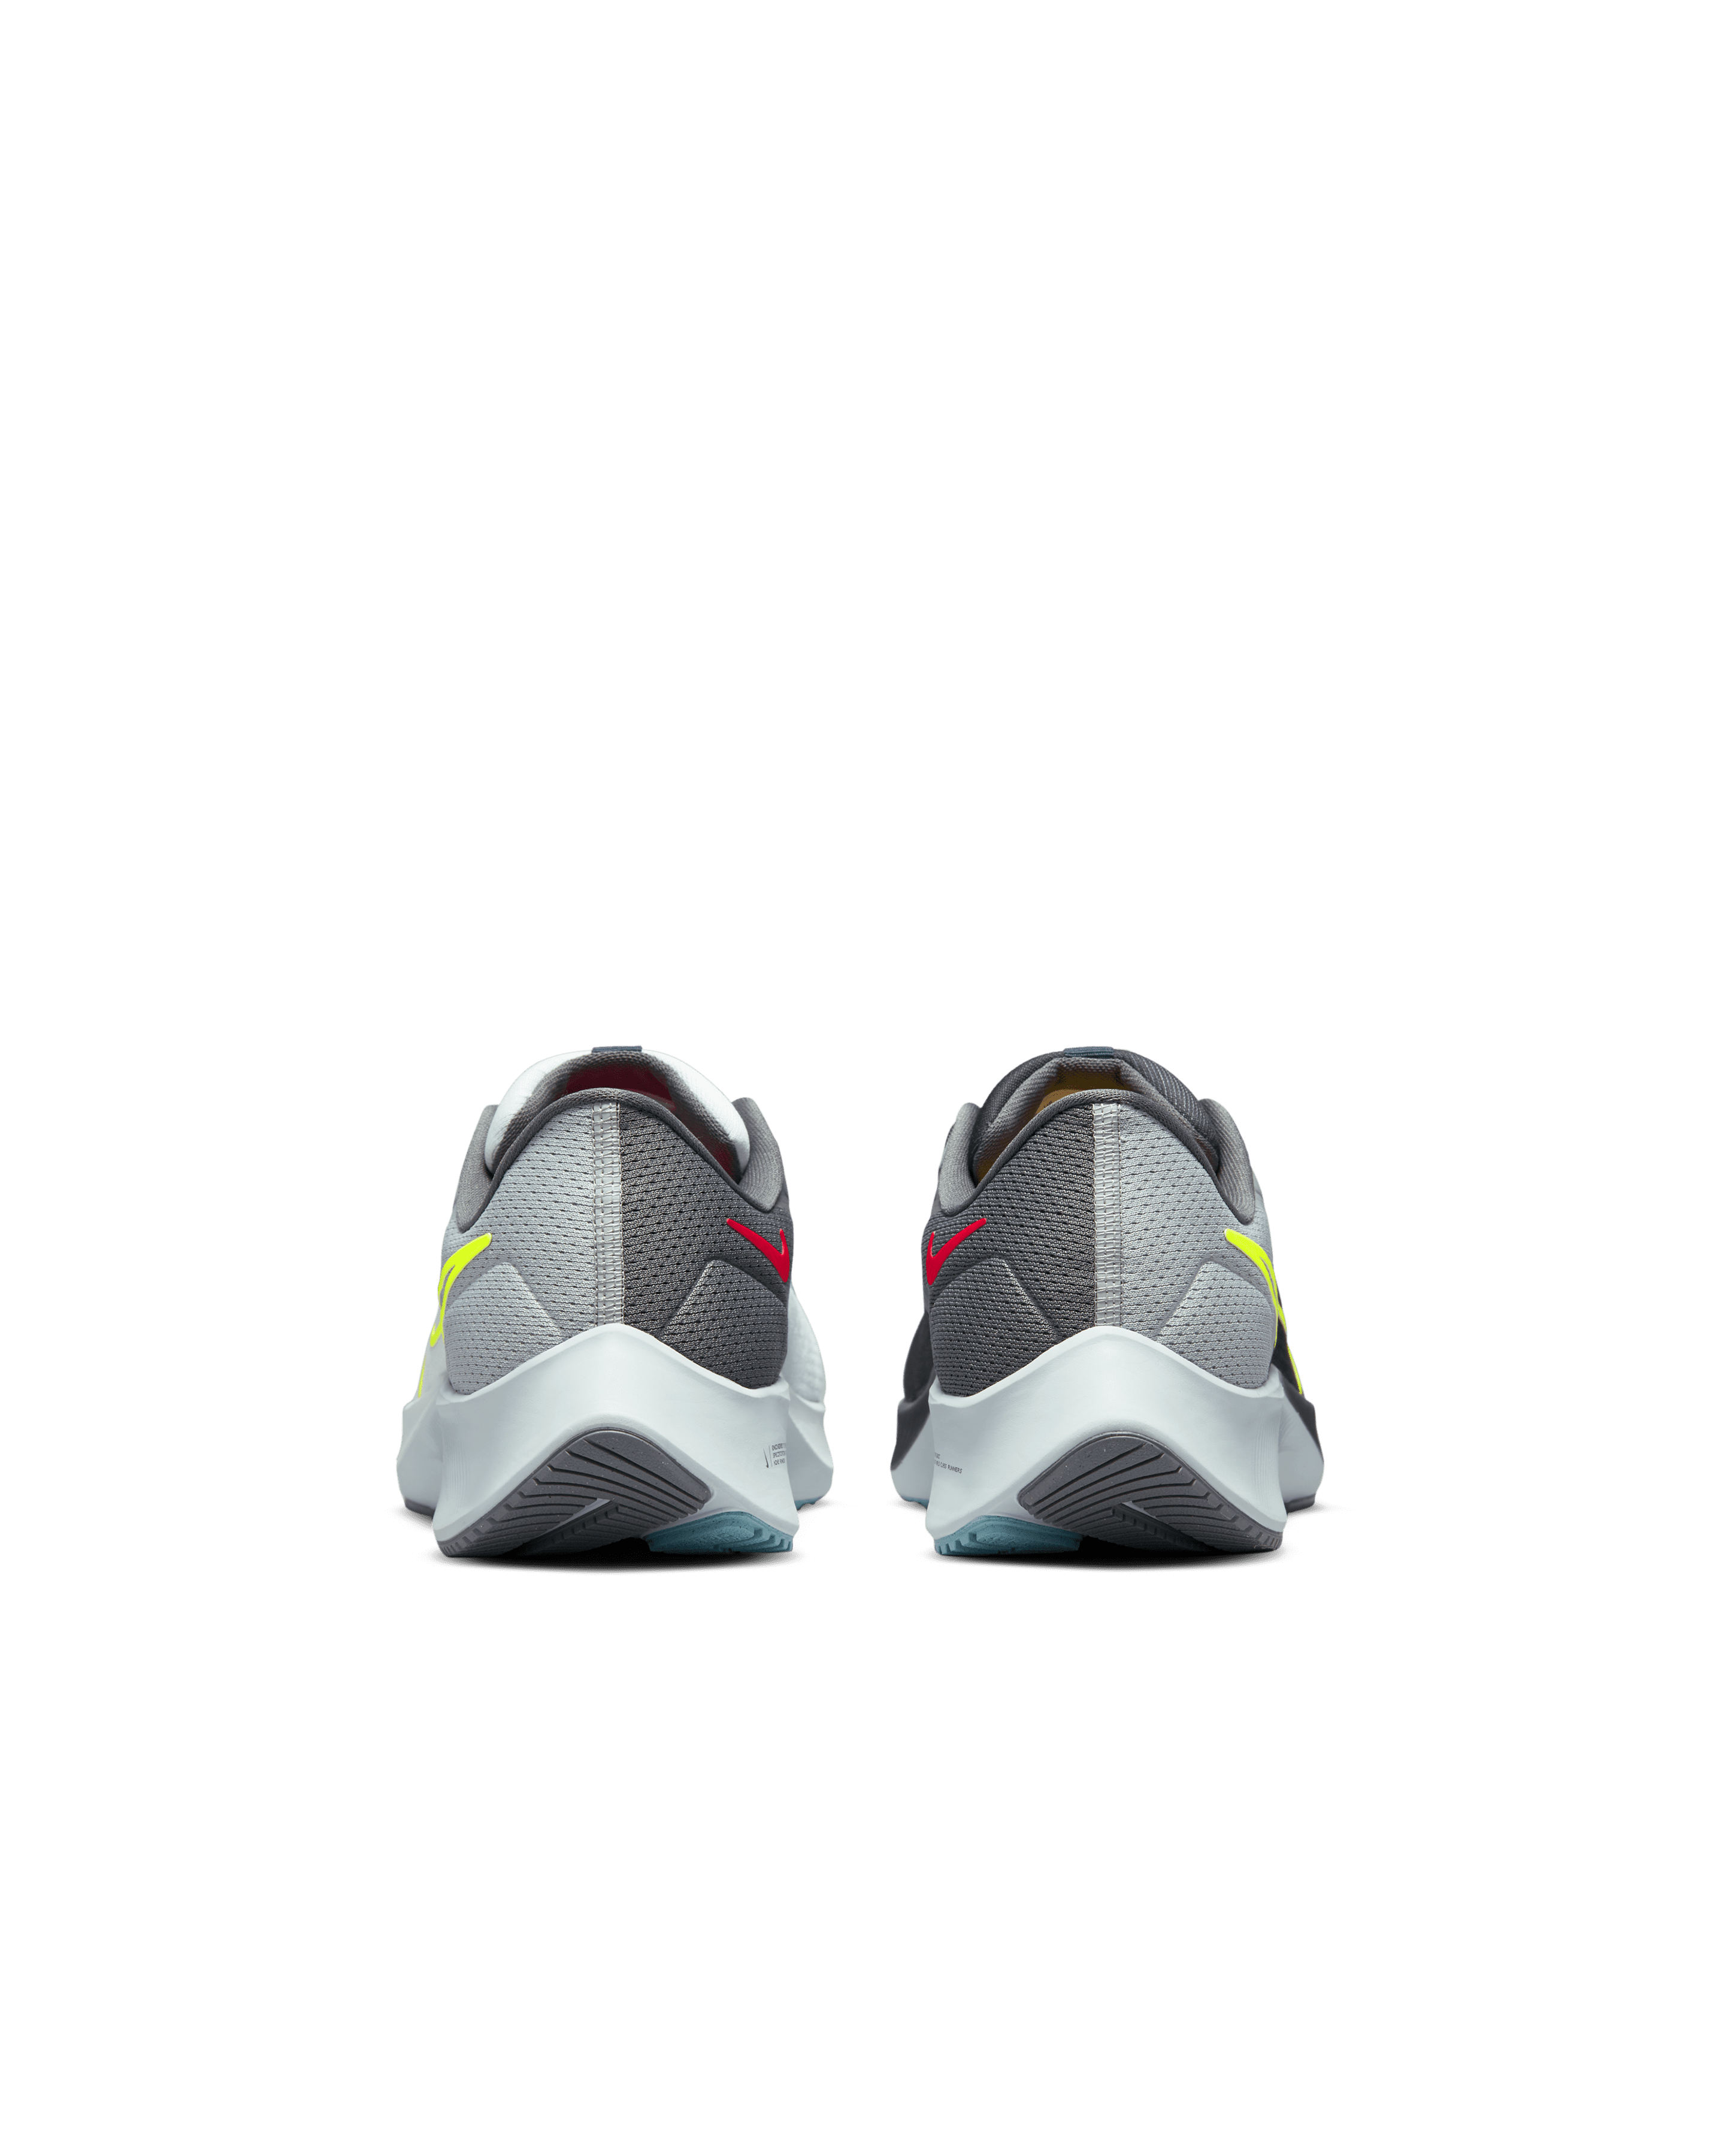 Nike pegasus 38 limited edition Air Zoom Pegasus 38 Review | Best Running Shoes 2021